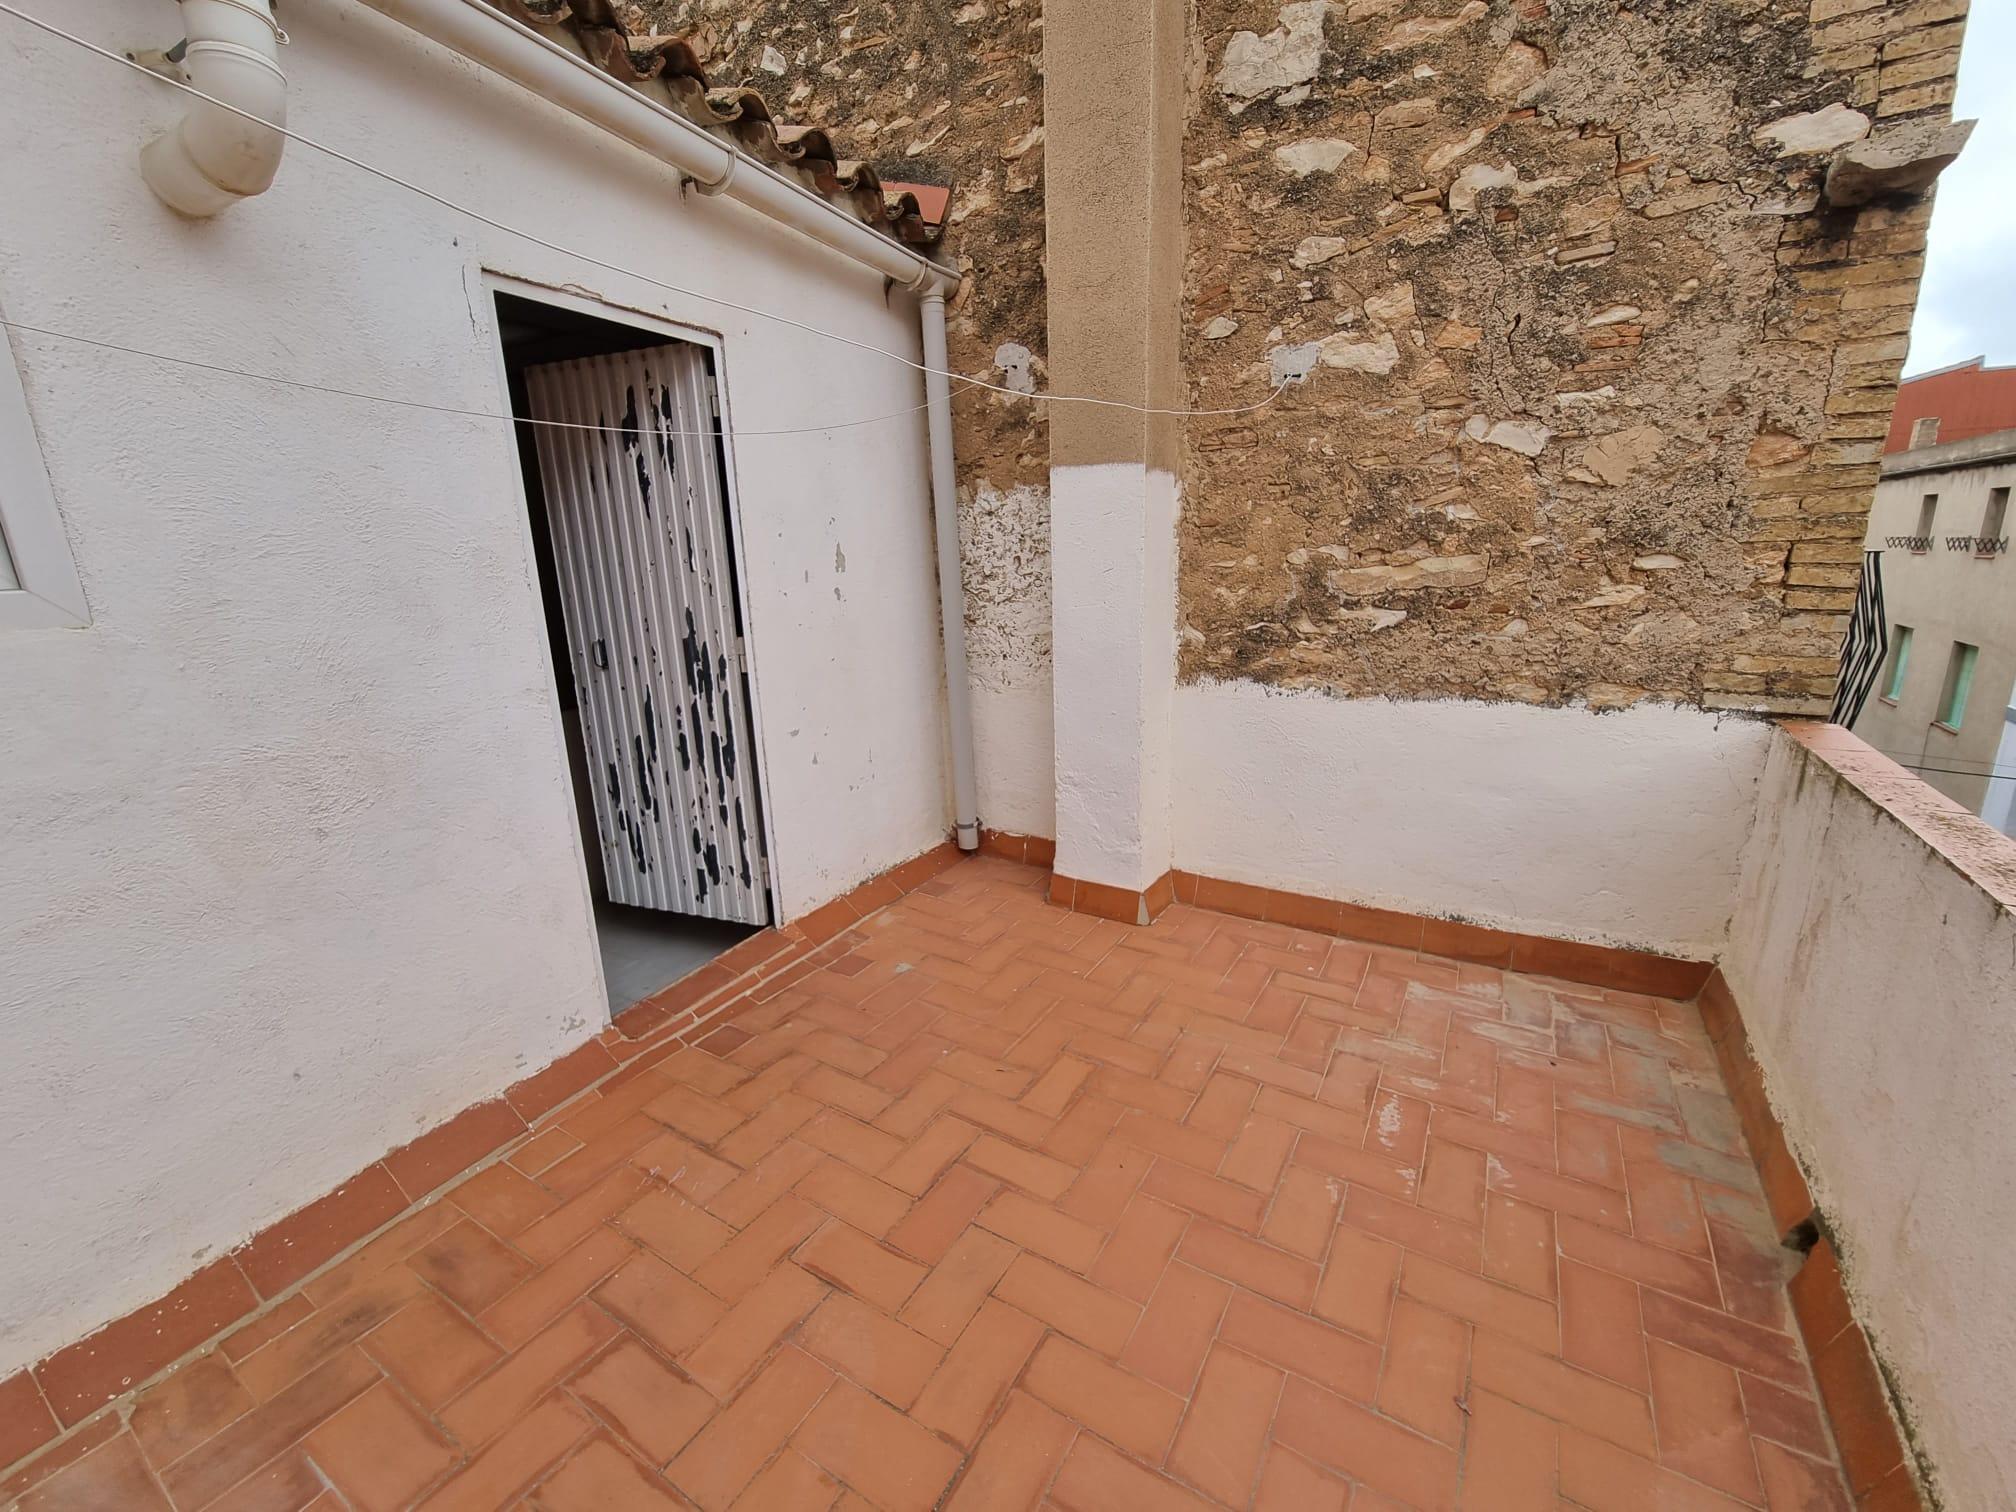 House in El Perelló with 4 bedrooms, 2 bathrooms and terrace